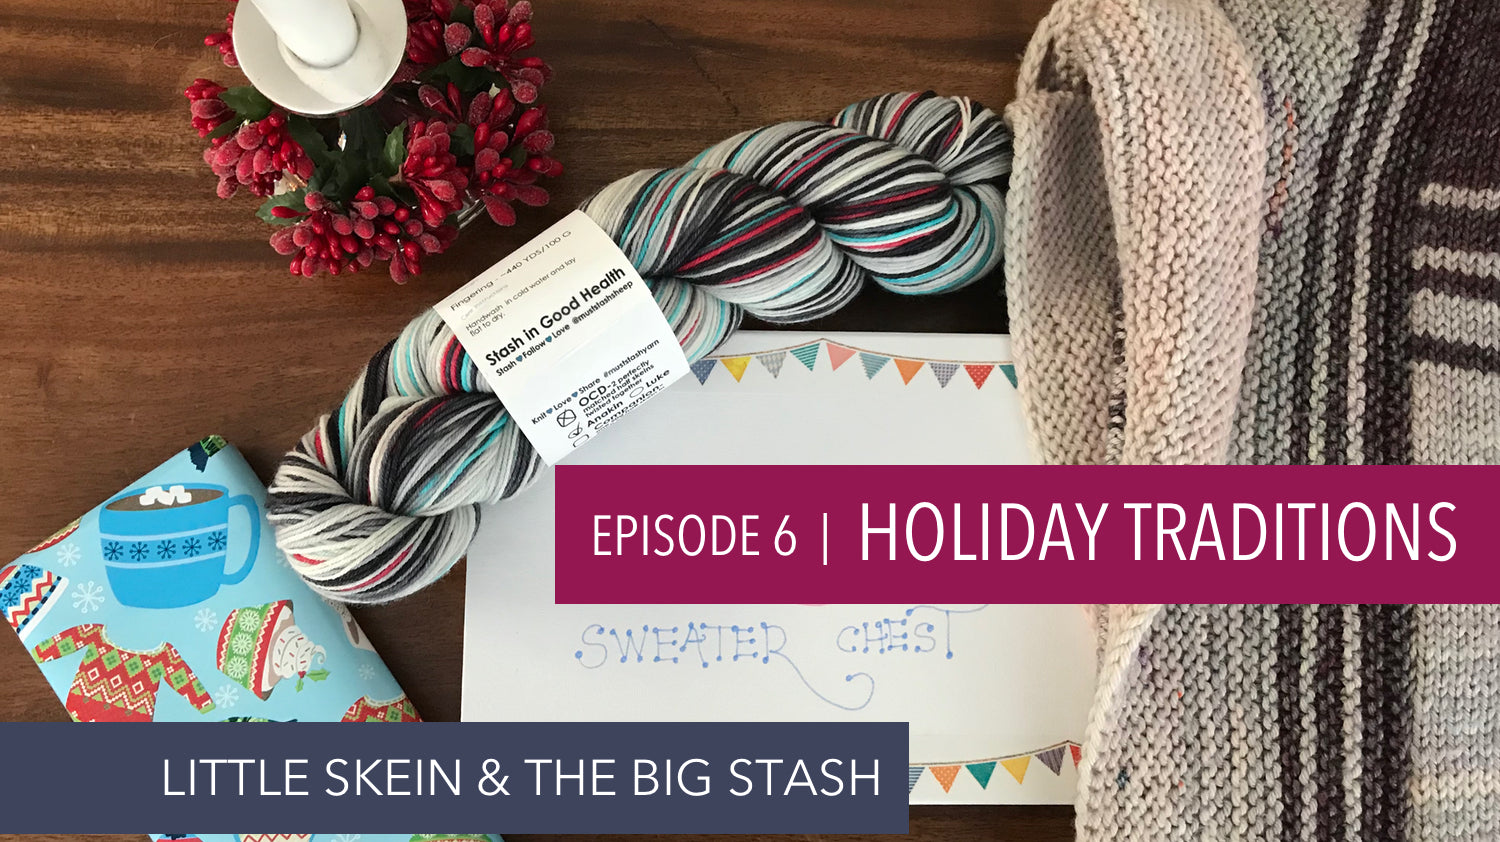 Episode 6: Holiday Traditions